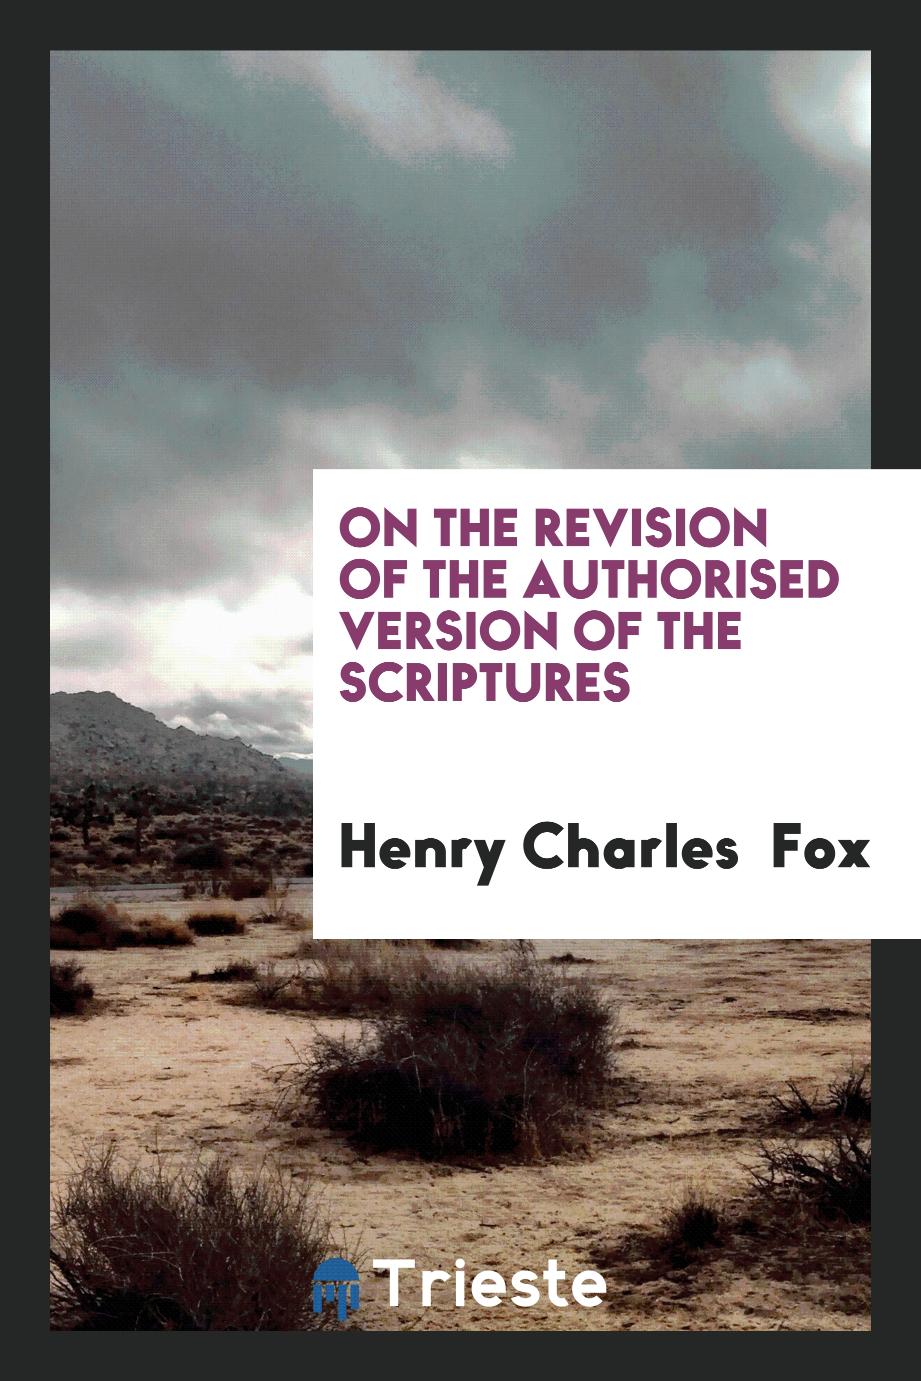 On the revision of the authorised version of the Scriptures